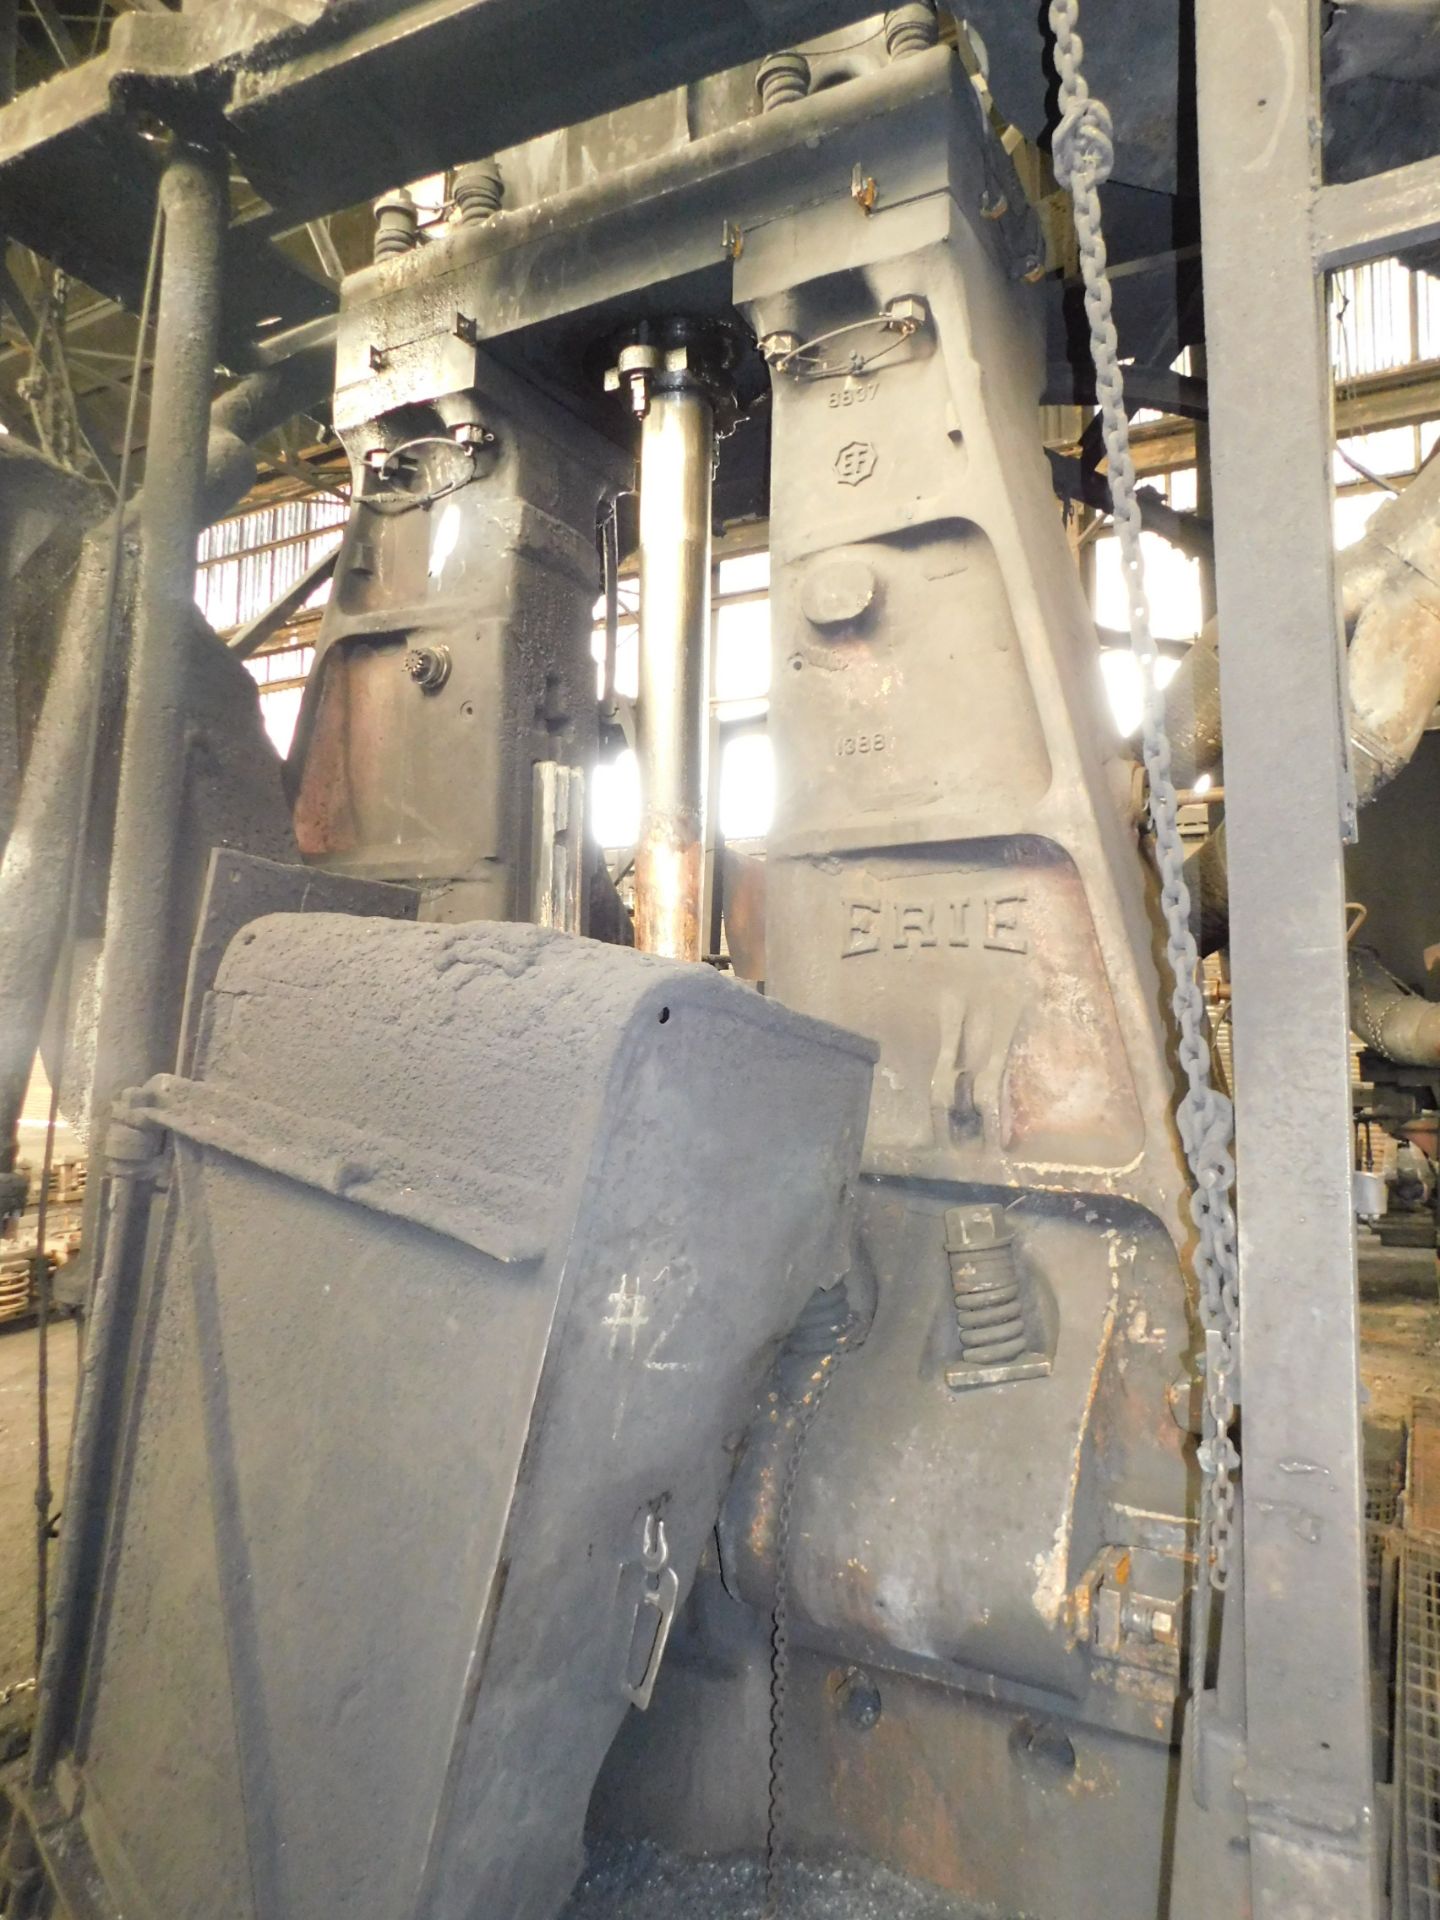 Erie 8000-Ton Bored for 10,000-Ton, Operating as 10,000-Ton Capacity Hammer Press, 32" Wide x 36" - Image 7 of 8